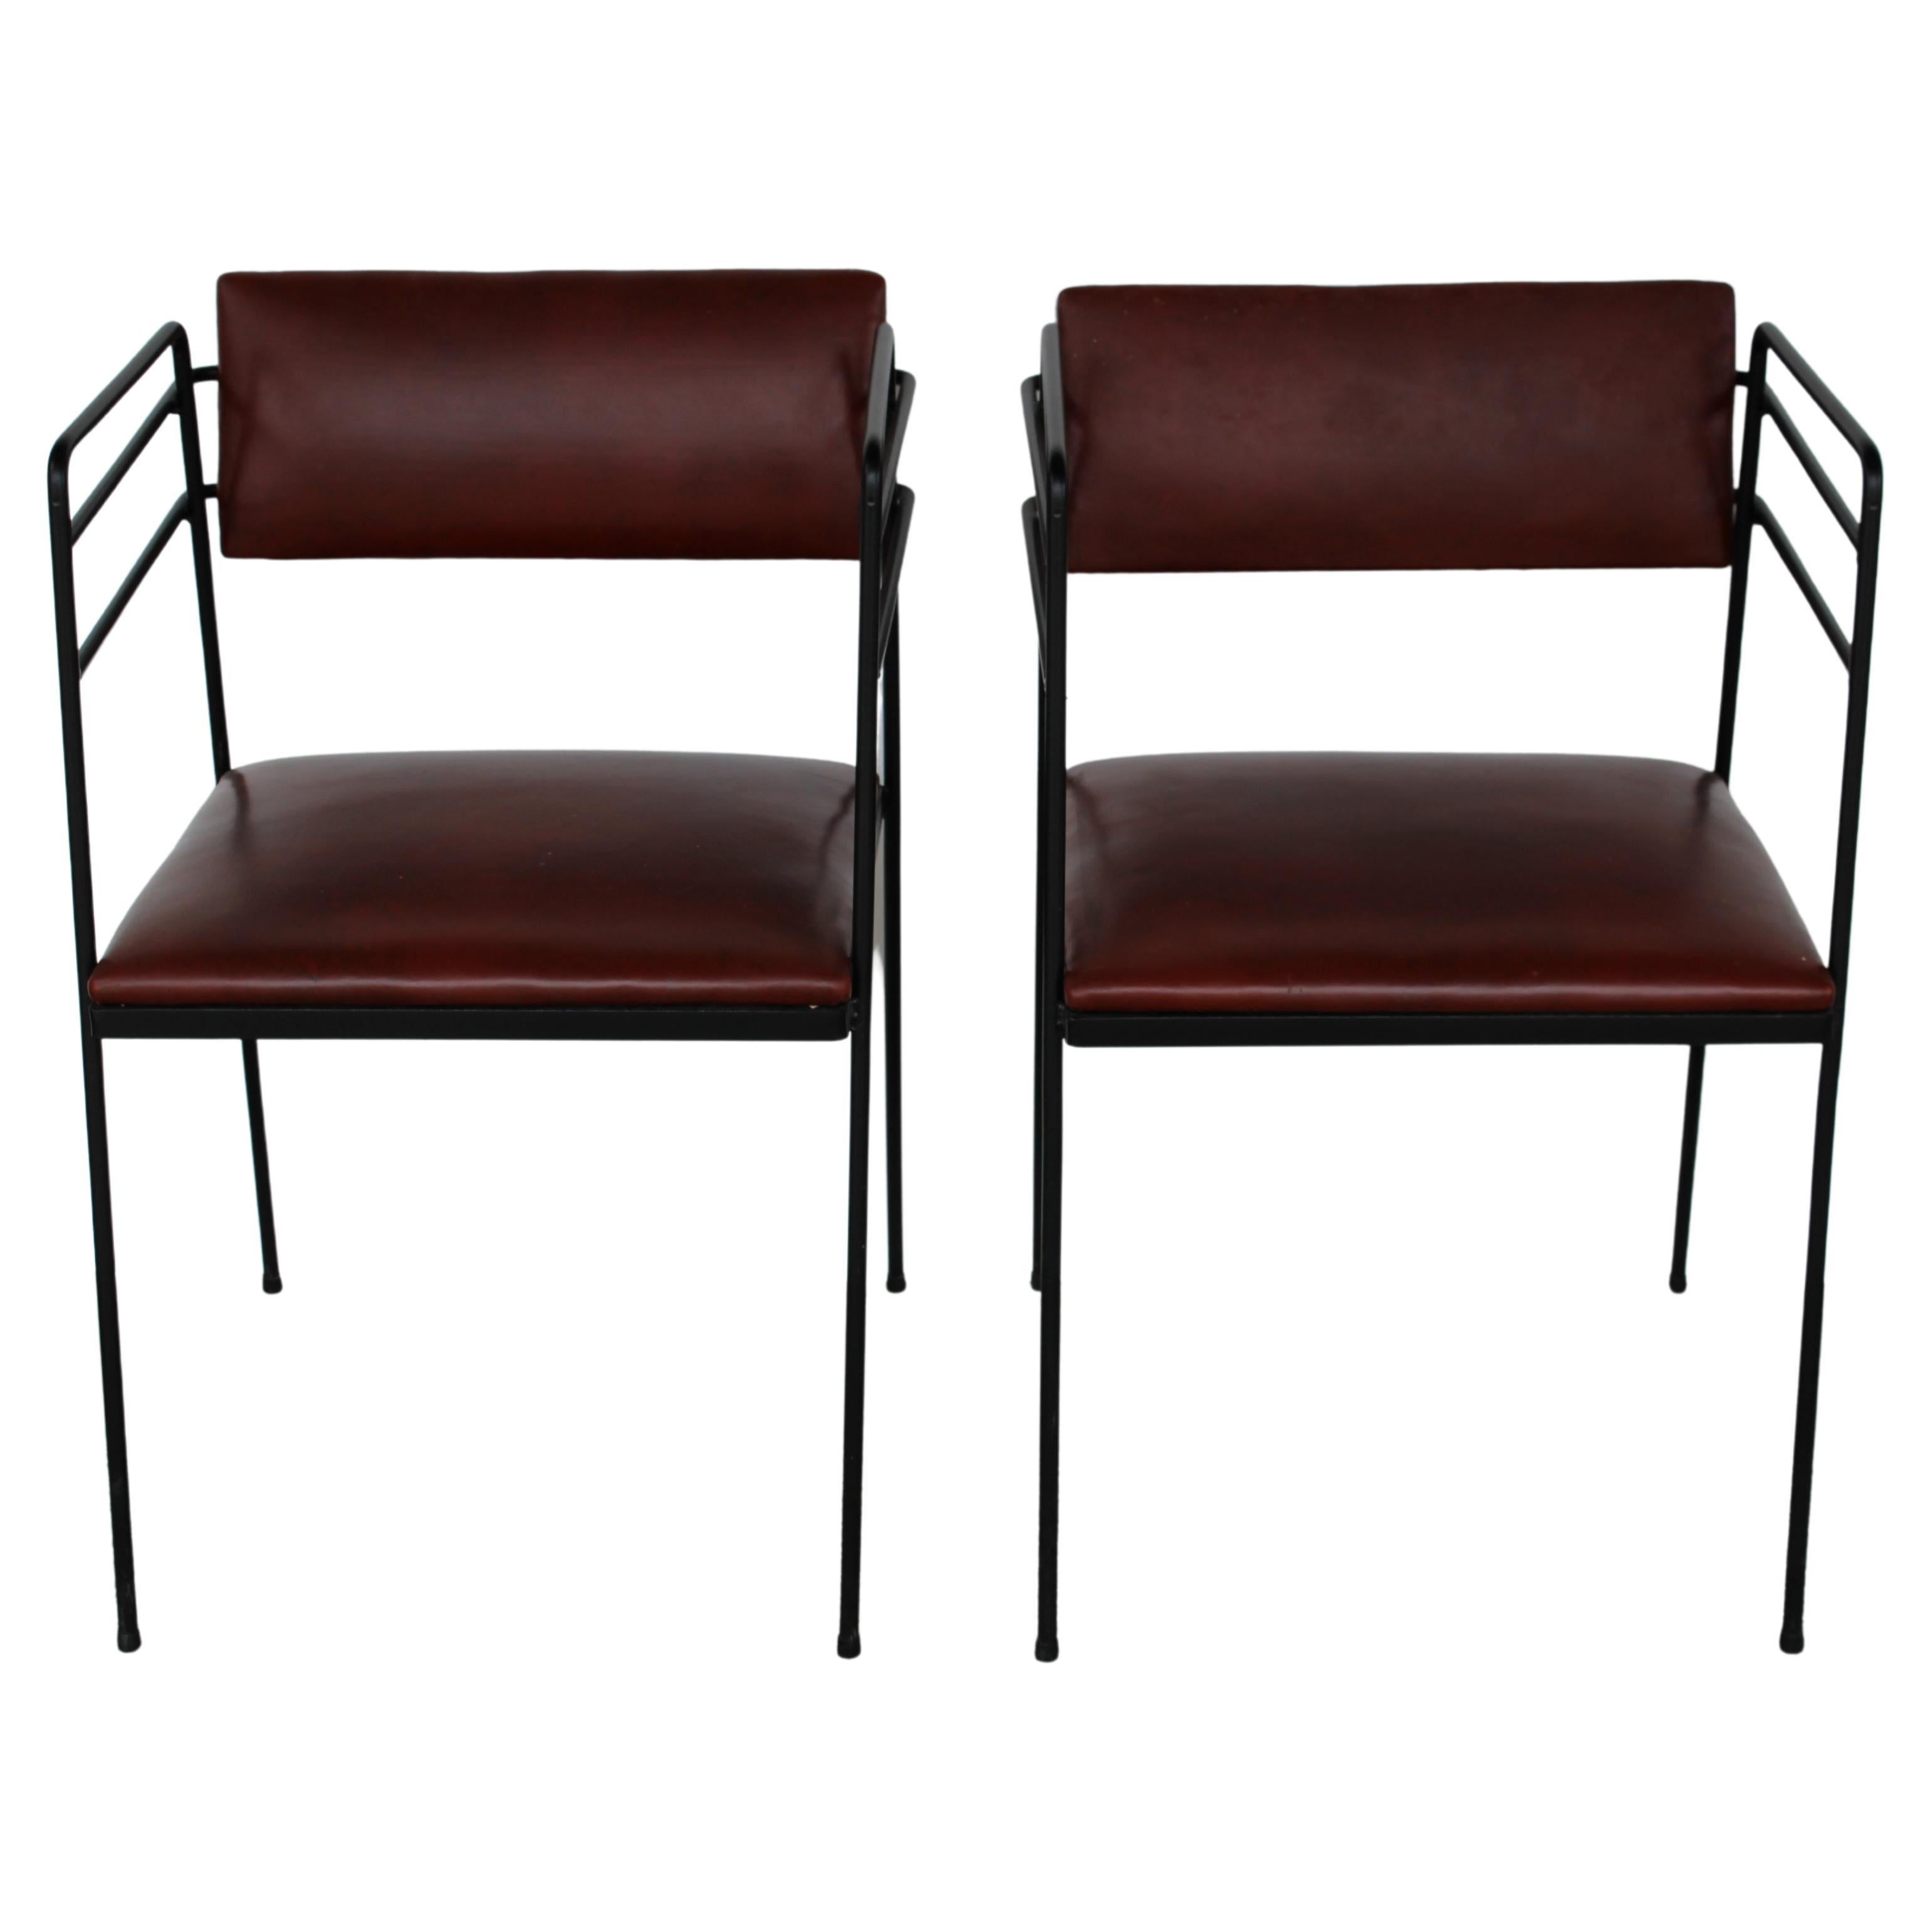 Pair of Mid Century Patio Chairs For Sale